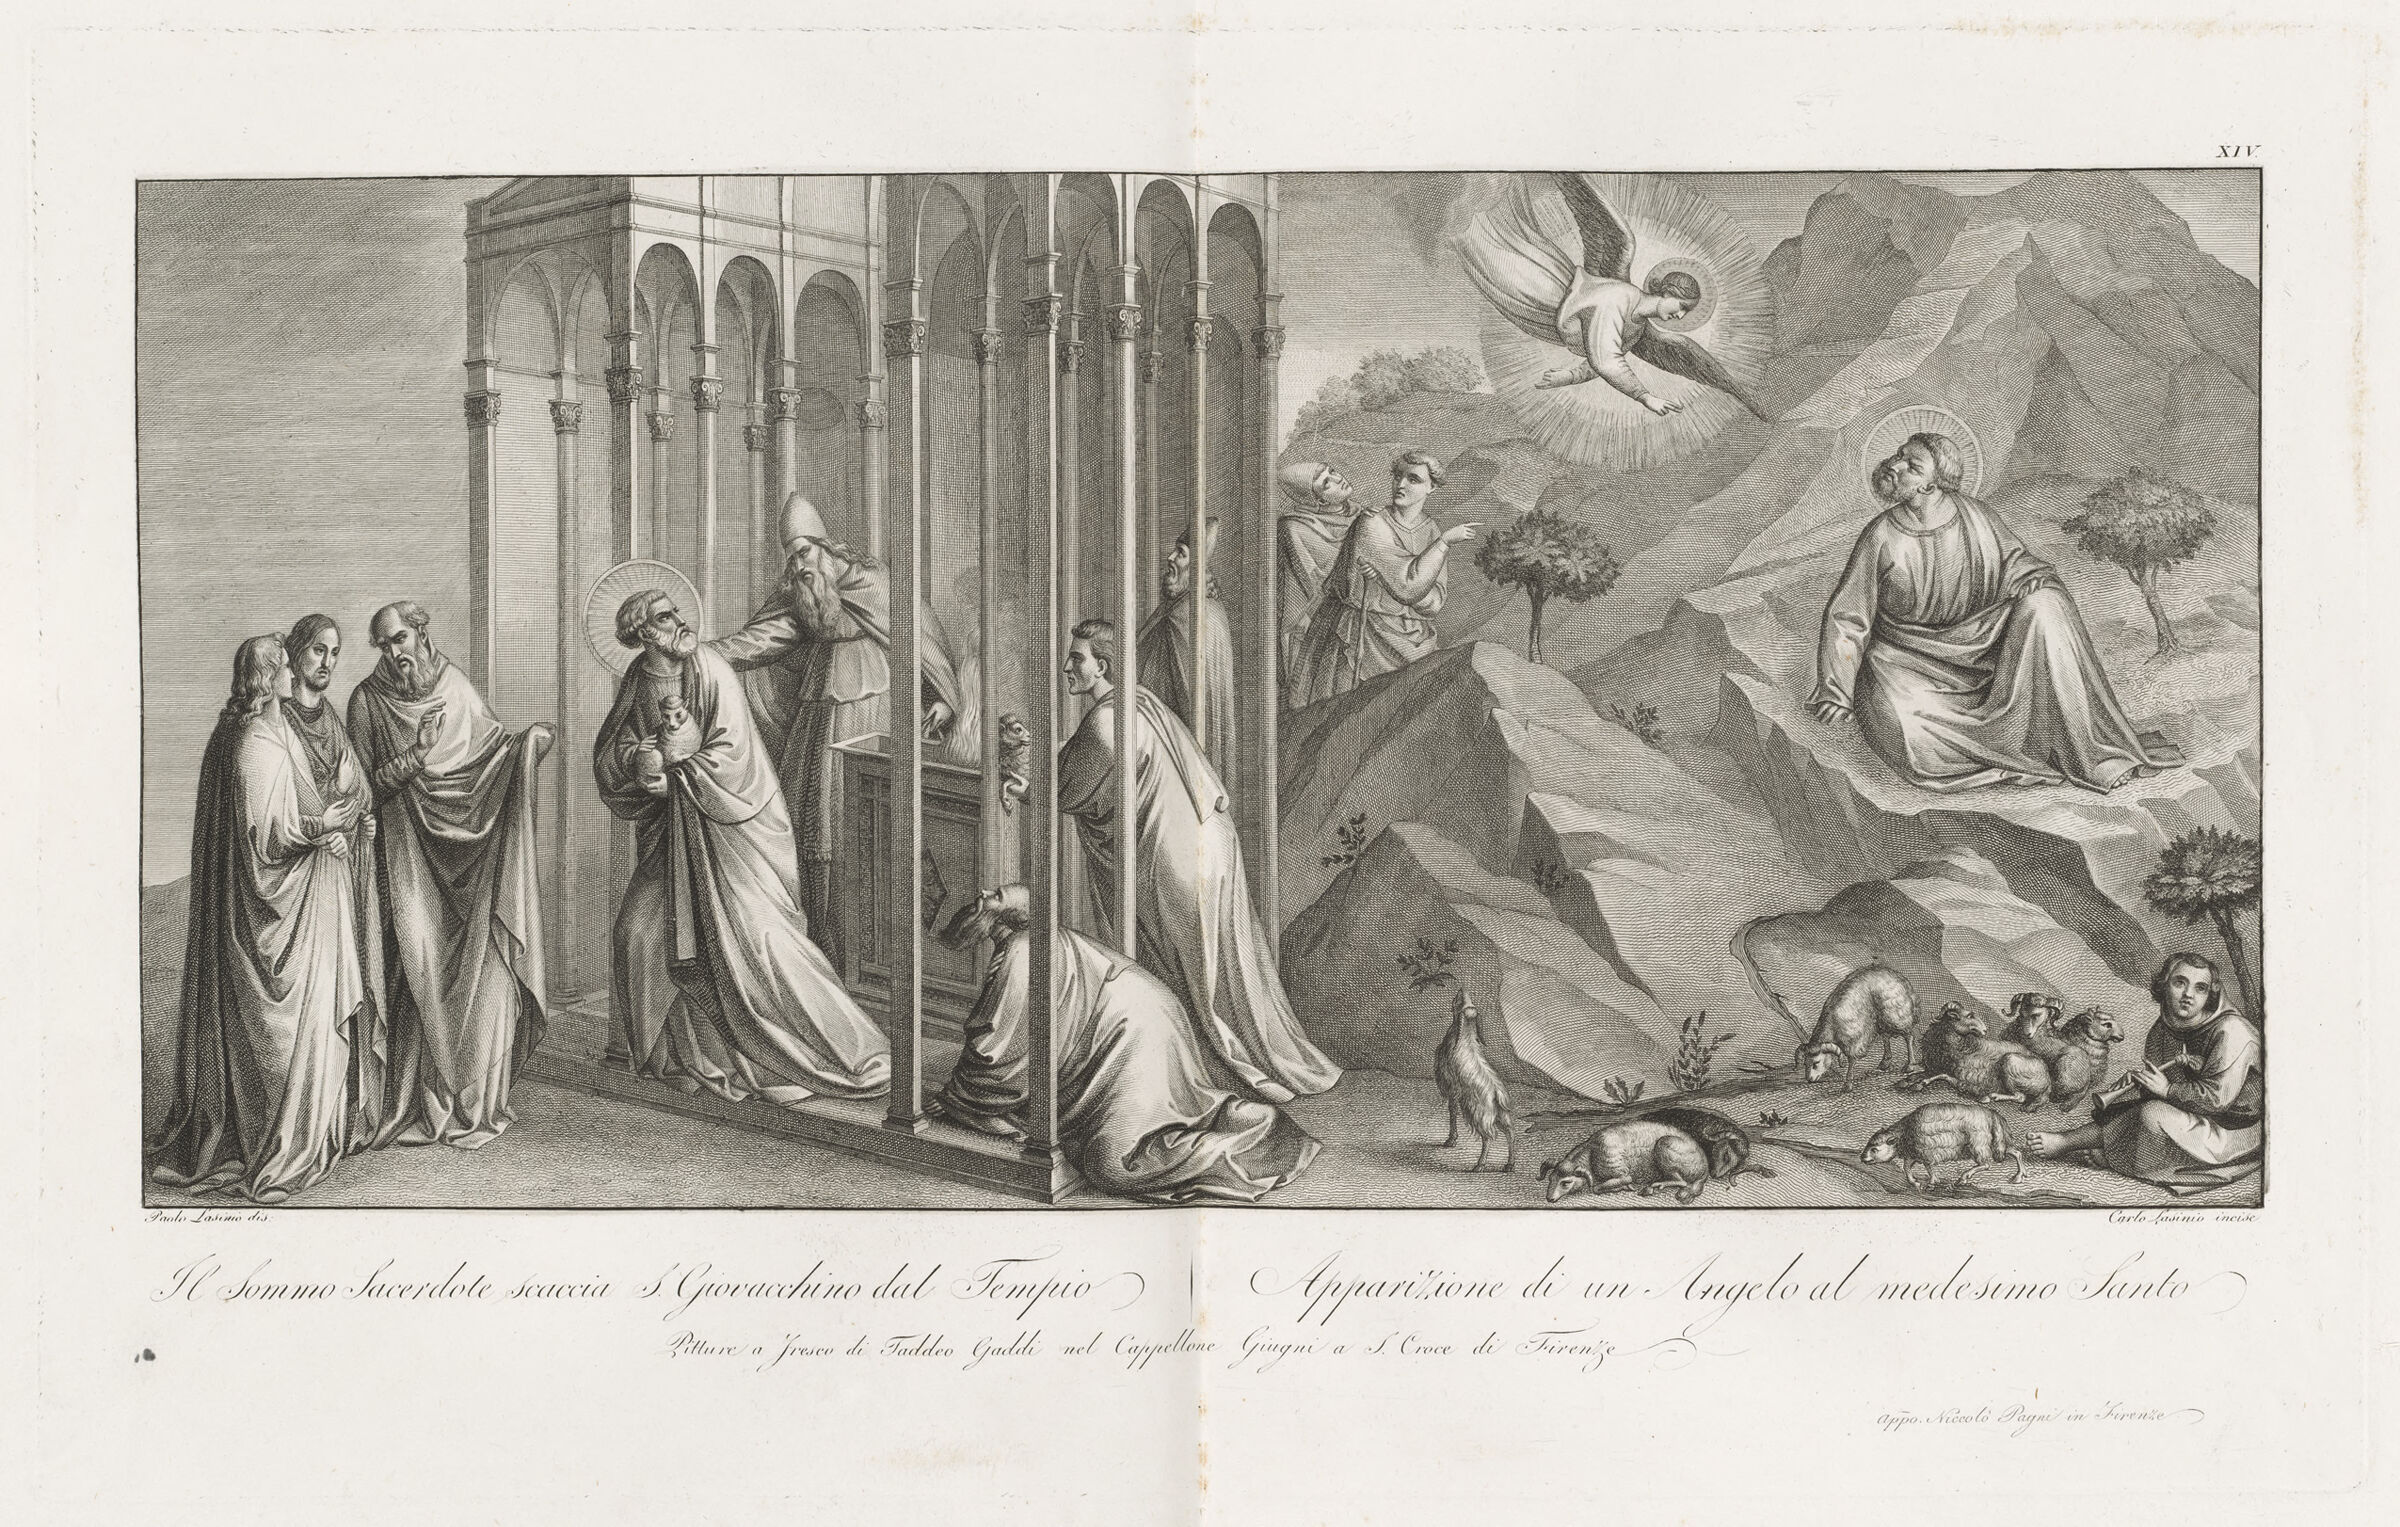 The High Prist Driving Saint Joachim From The Temple; The Angel Appearing To Saint Joachim